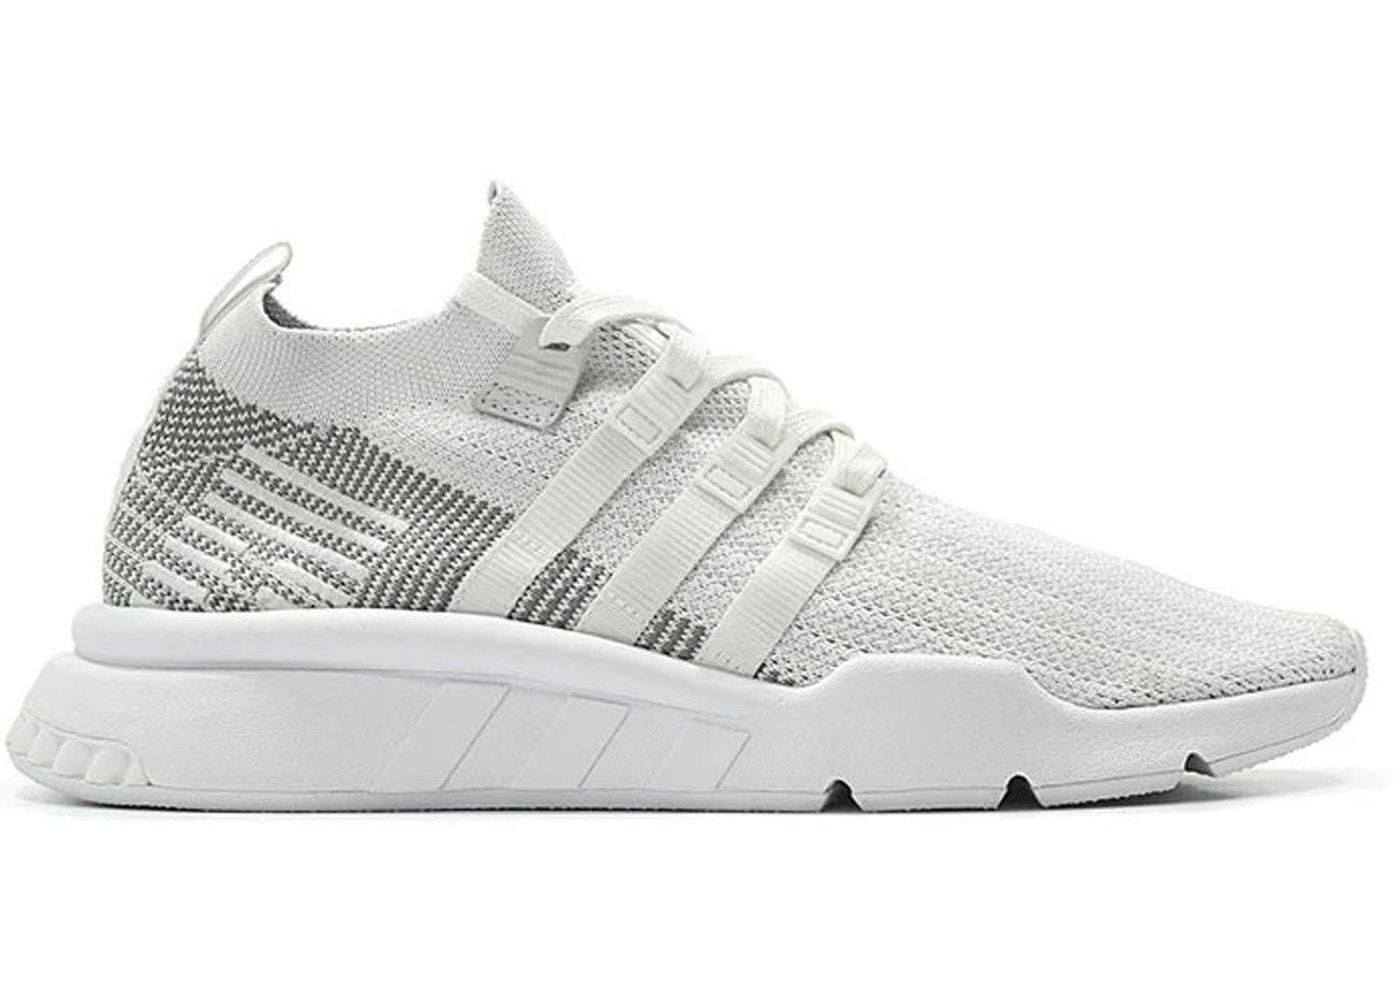 EQT Support Mid ADV PK White Grey by ADIDAS